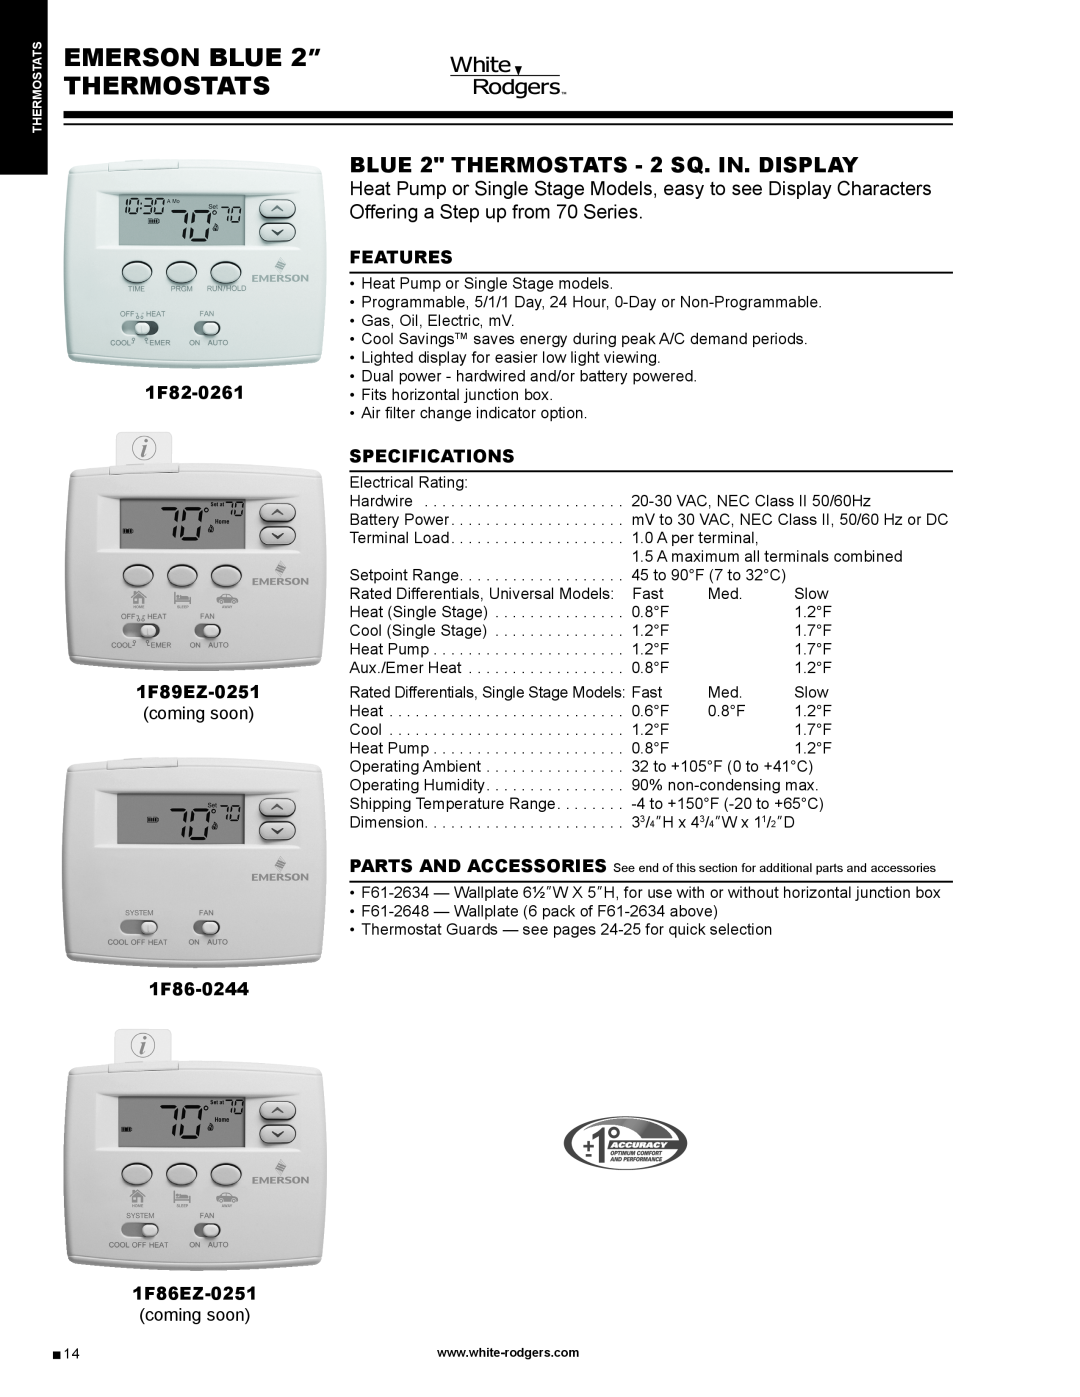 Emerson 1F86EZ-0251, 1F86-0244 specifications EMERSON BLUE 2” THERMOSTATS, 1F82-0261 1F89EZ-0251, Features, Specifications 